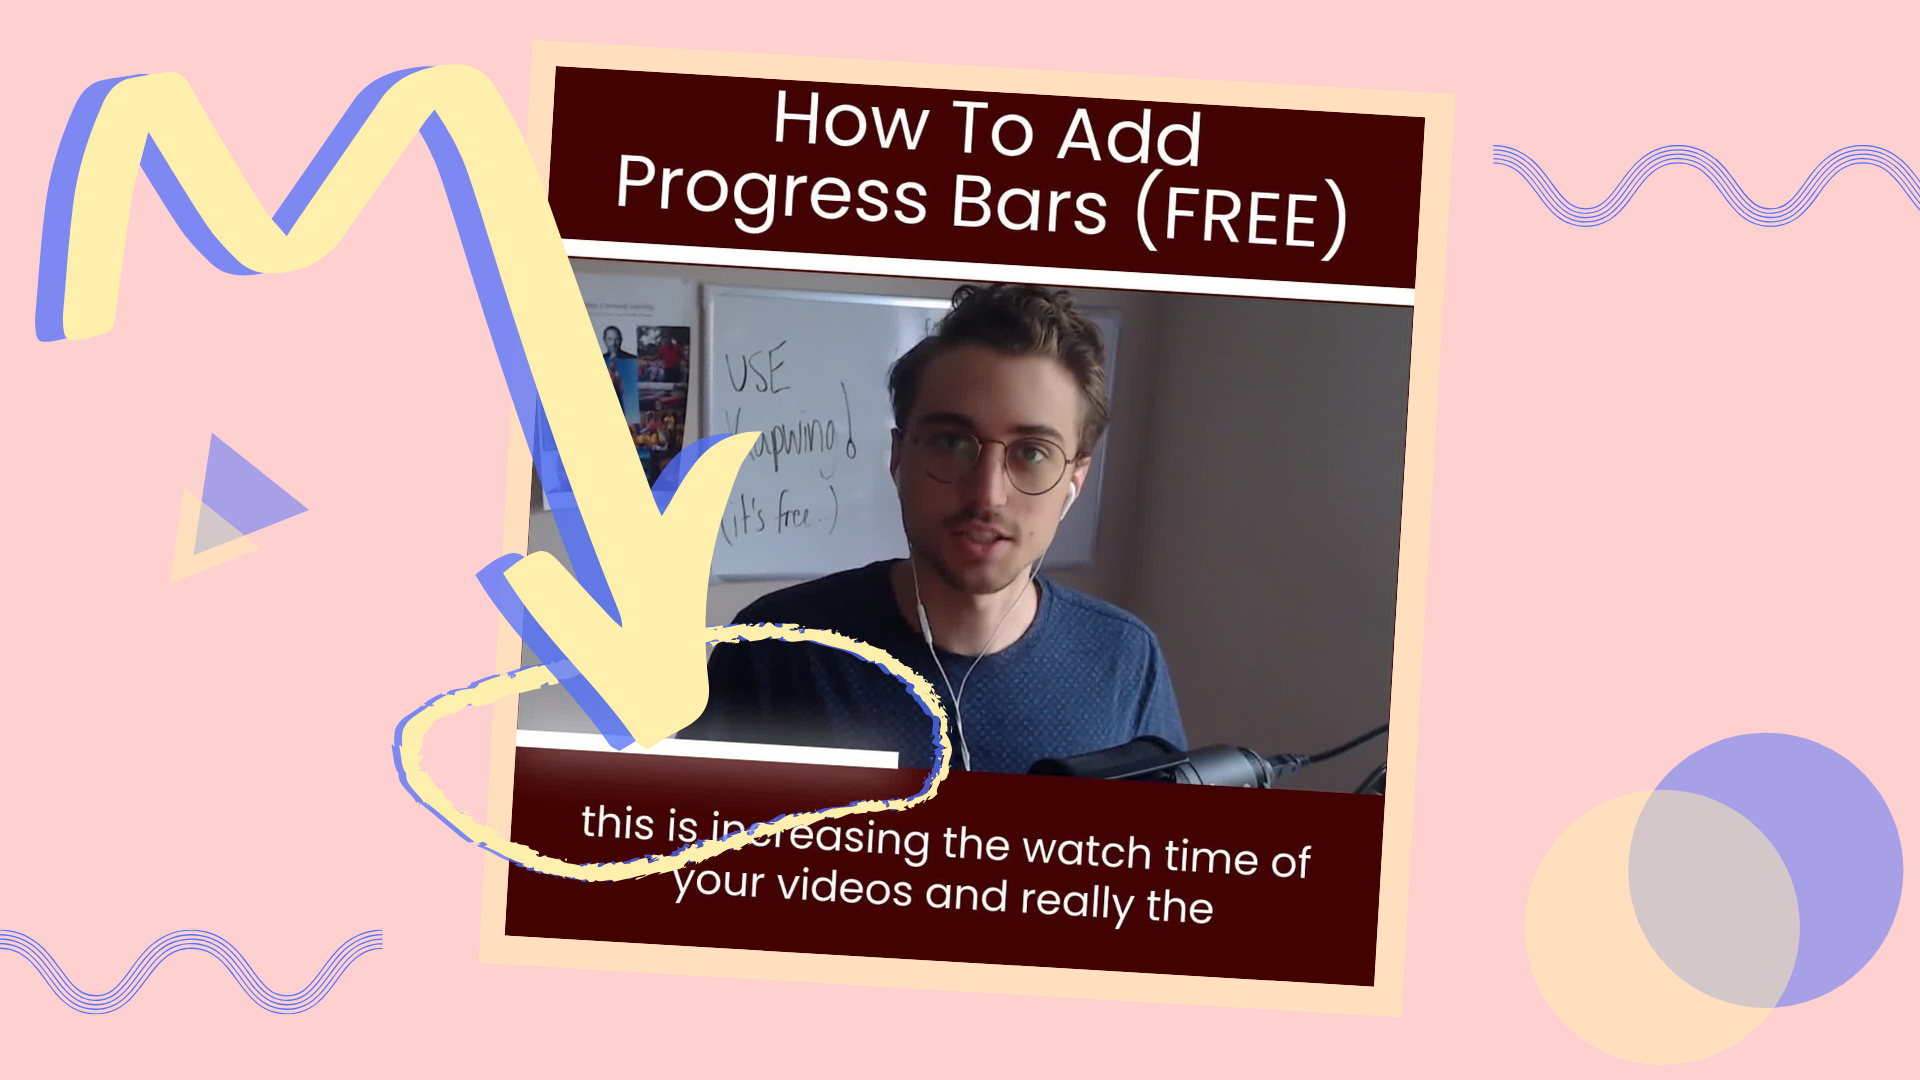 How to Add Progress Bars to Video